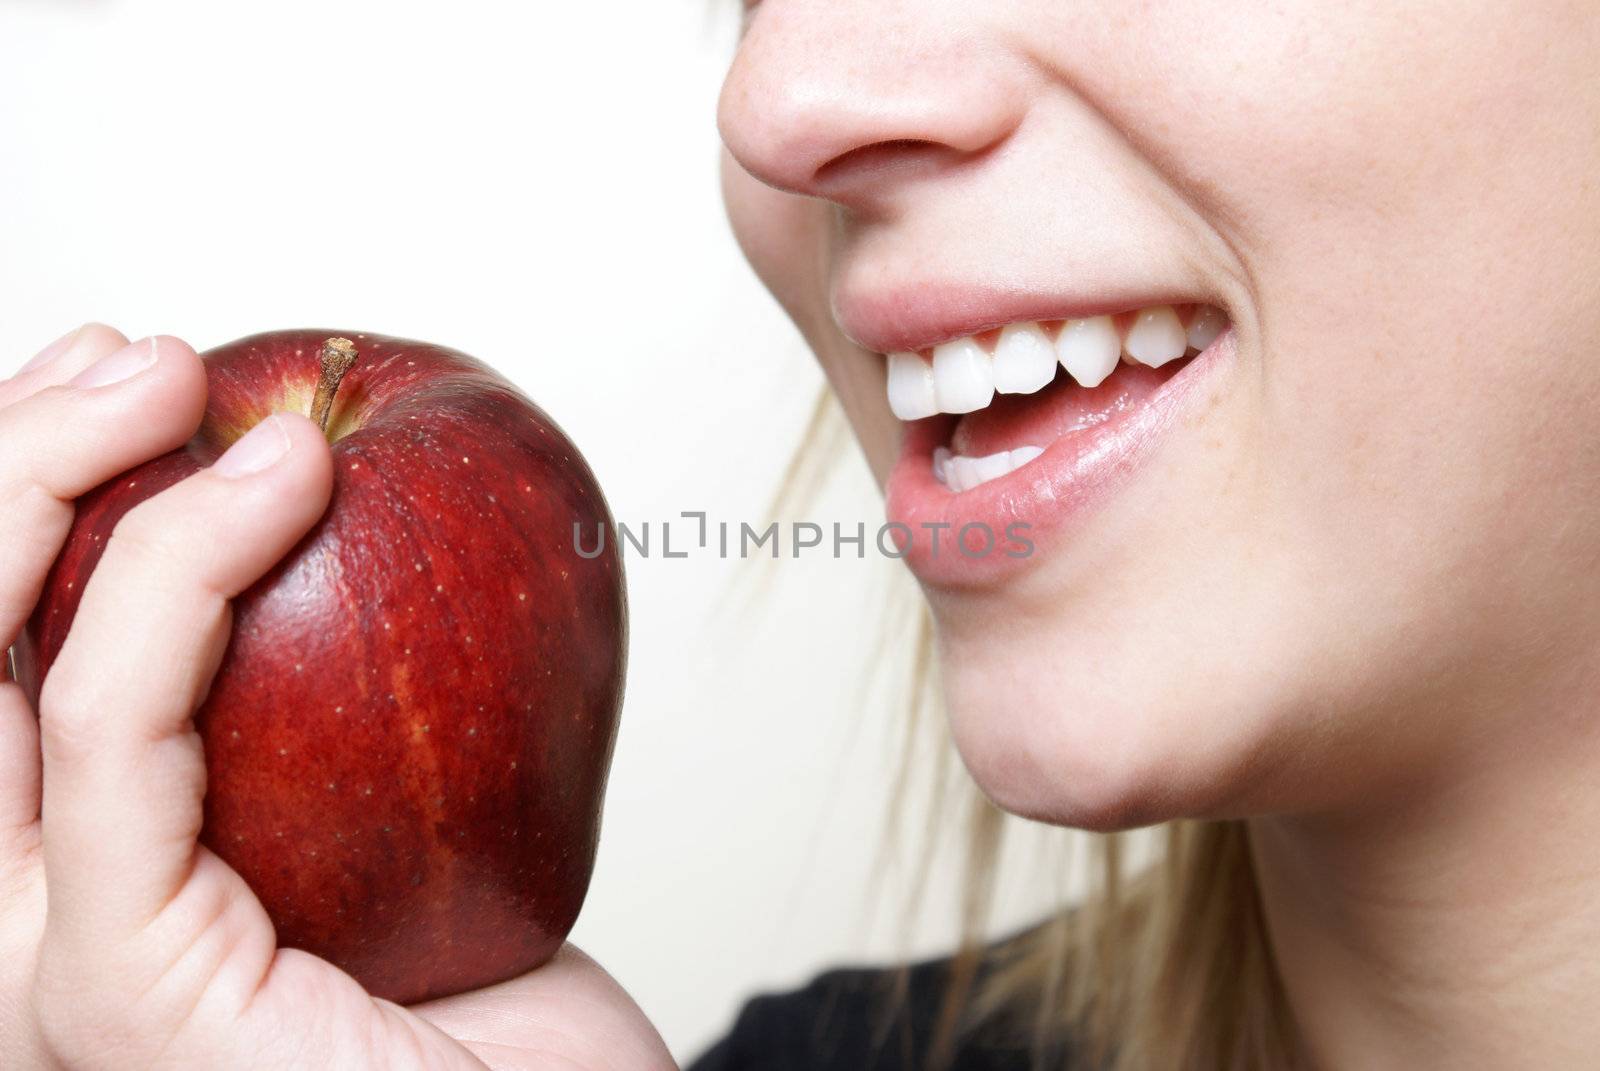 A happy young woman stays healthy by eating some ripe fruit.